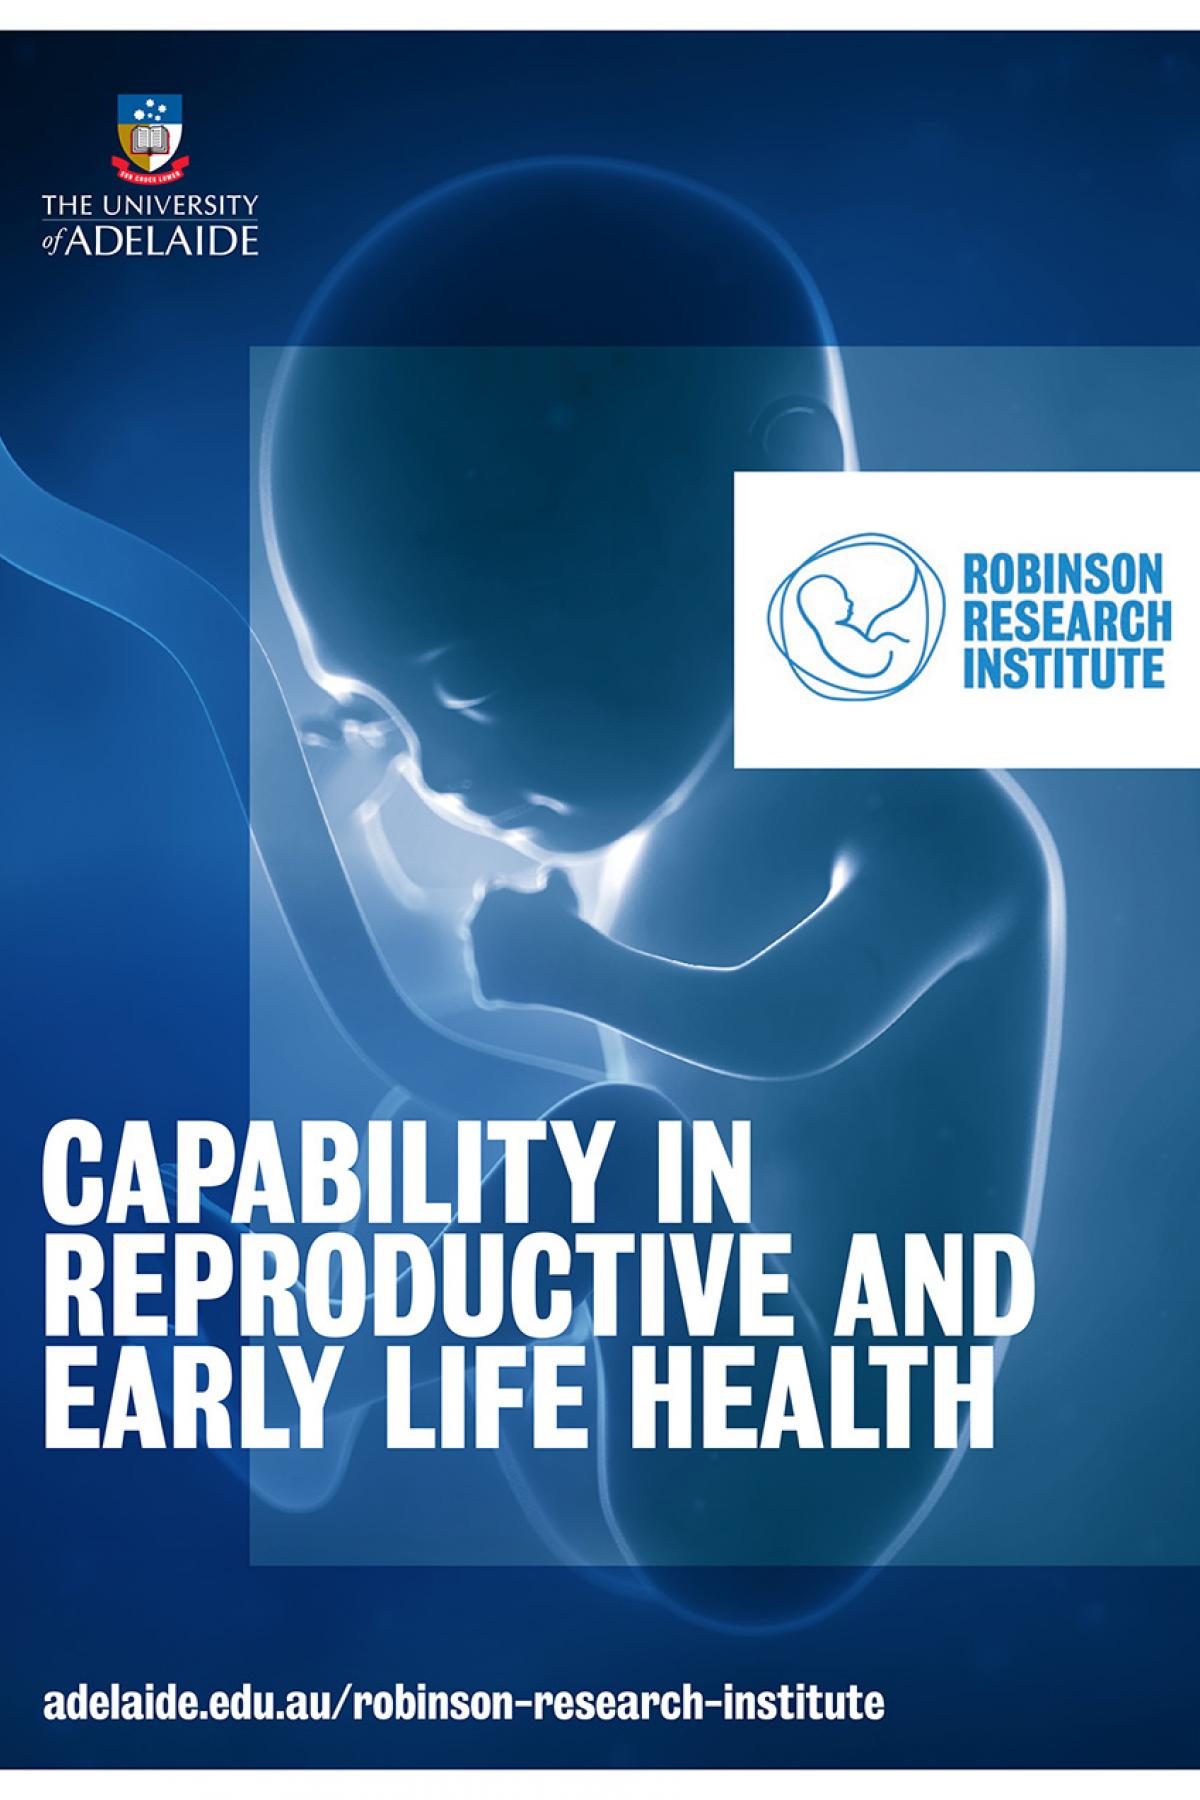 Capability in reproductive and early life health